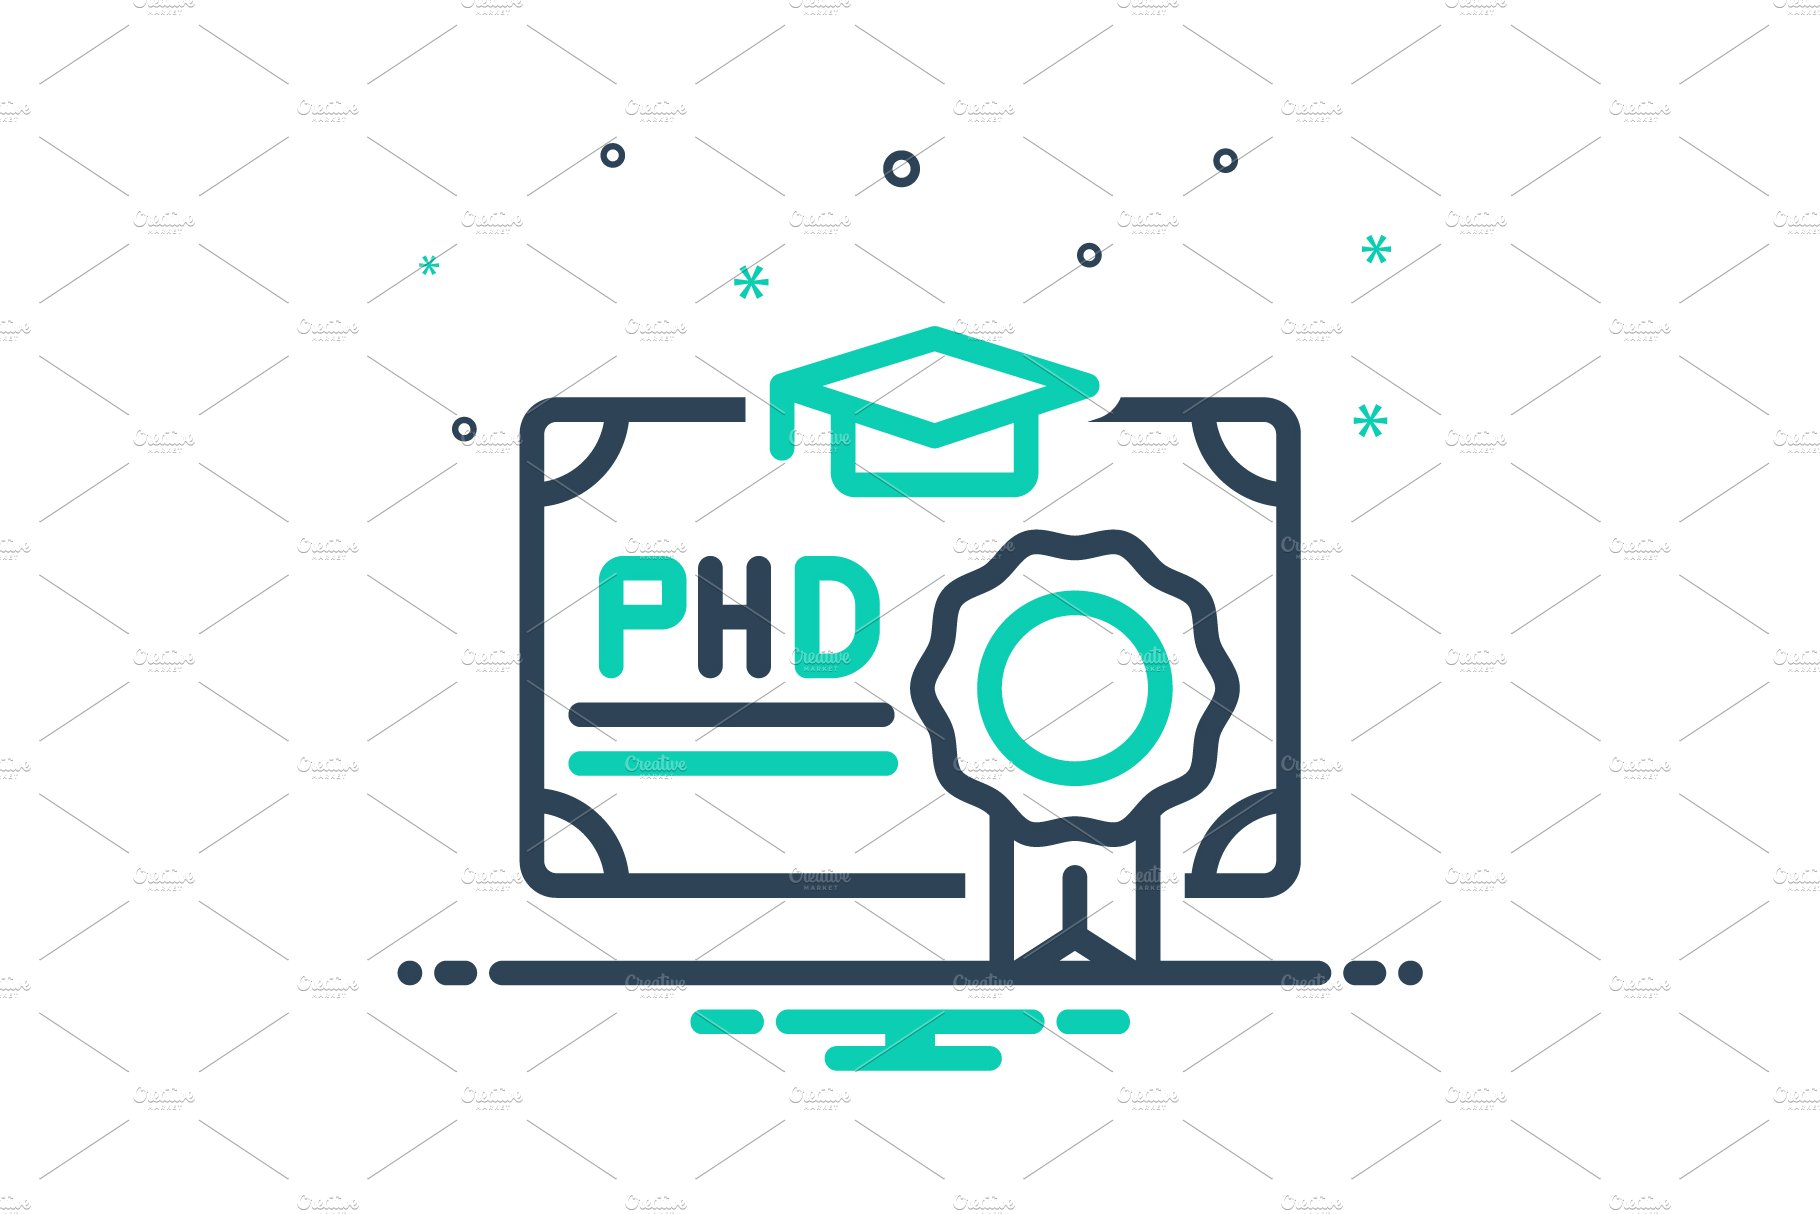 PHD letter logo design with polygon shape. PHD polygon and cube shape logo  design. PHD hexagon vector logo template white and black colors. PHD  monogram, business and real estate logo.
:: tasmeemME.com